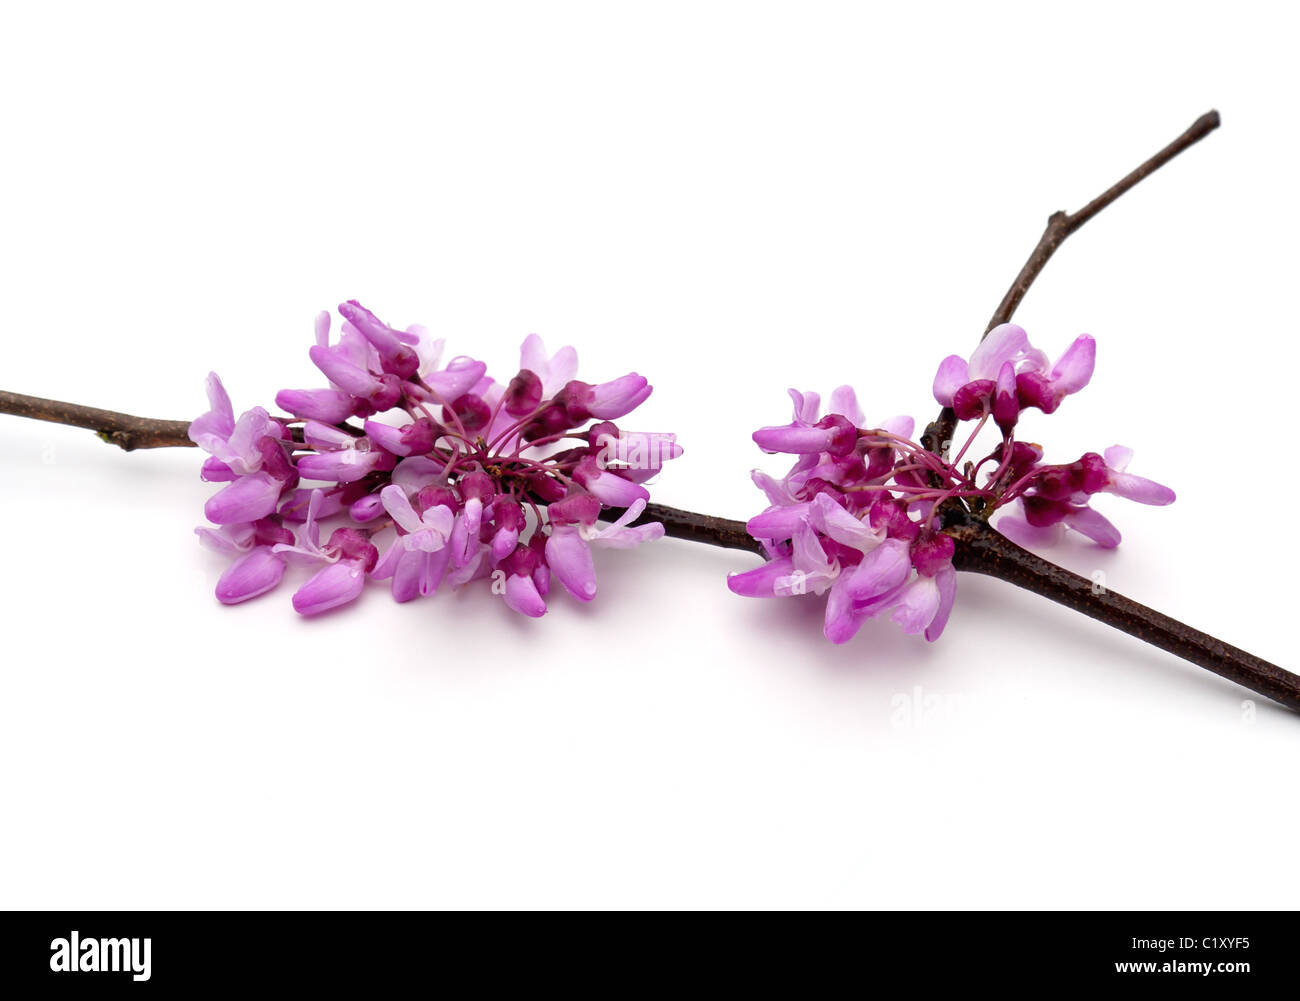 Eastern Redbud (Cercis canadensis) on a white background Stock Photo